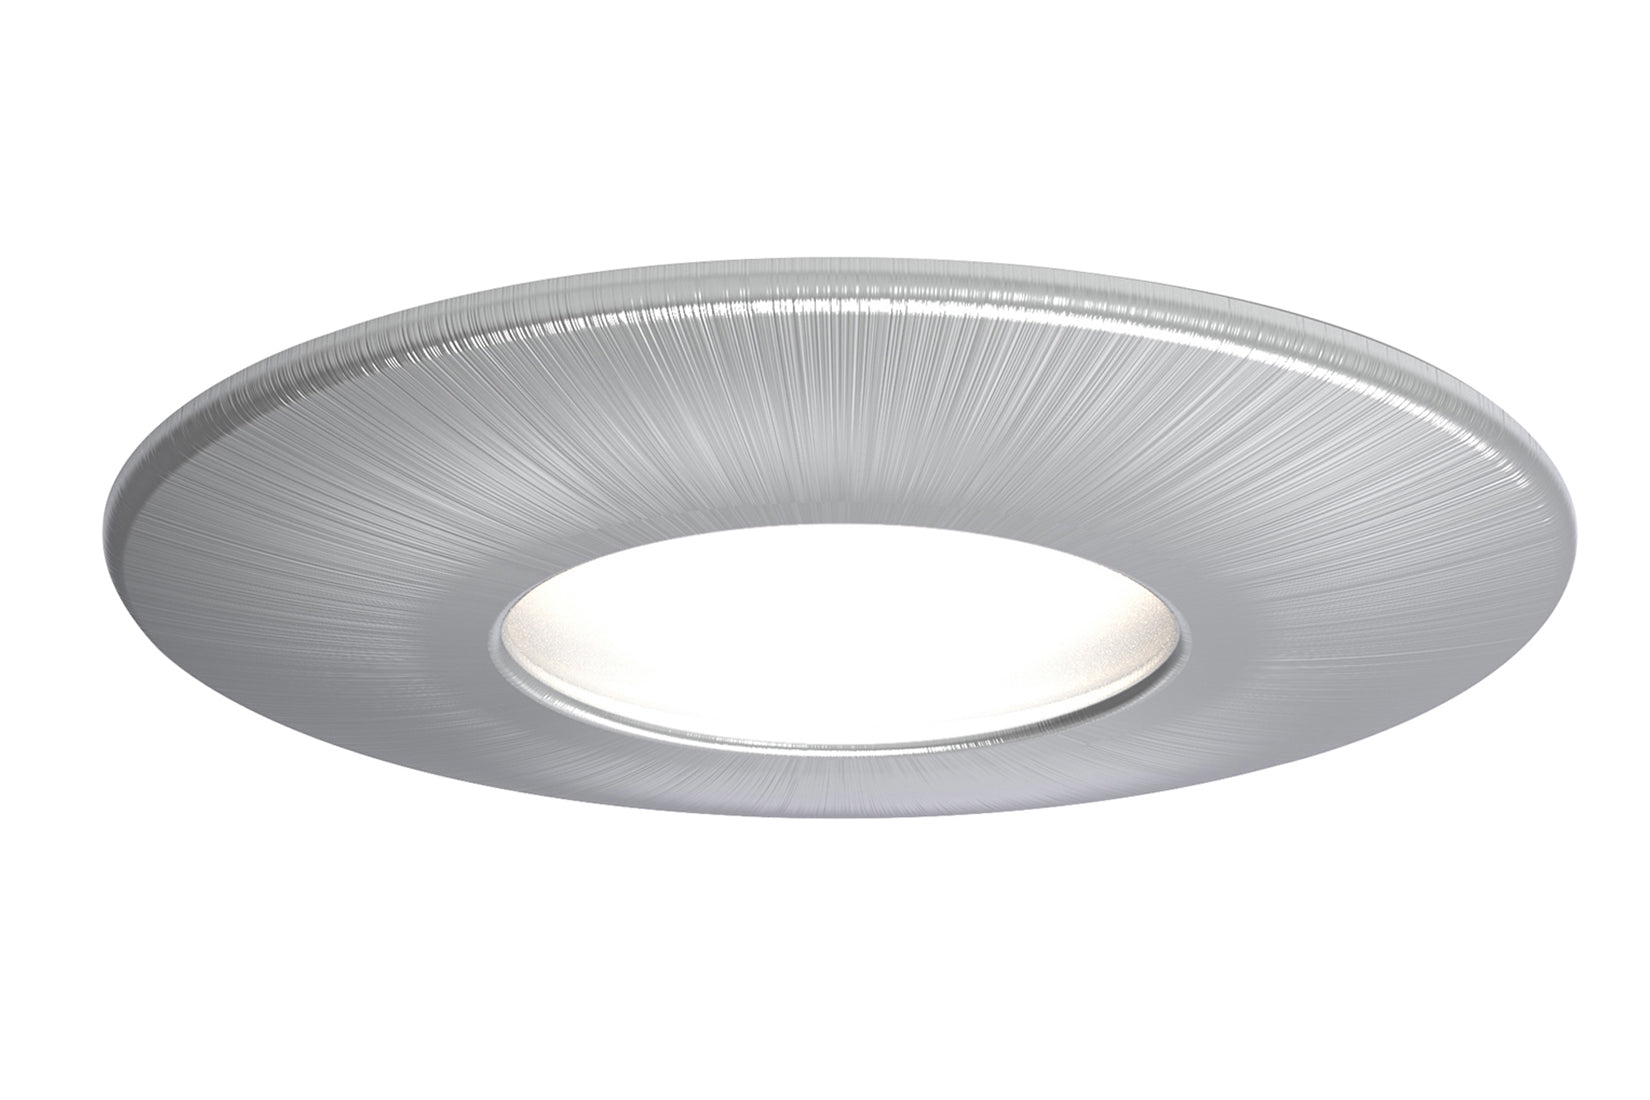 4lite WiZ Connected Fire-Rated IP20 GU10 Smart LED Downlight - Satin Chrome (Single)